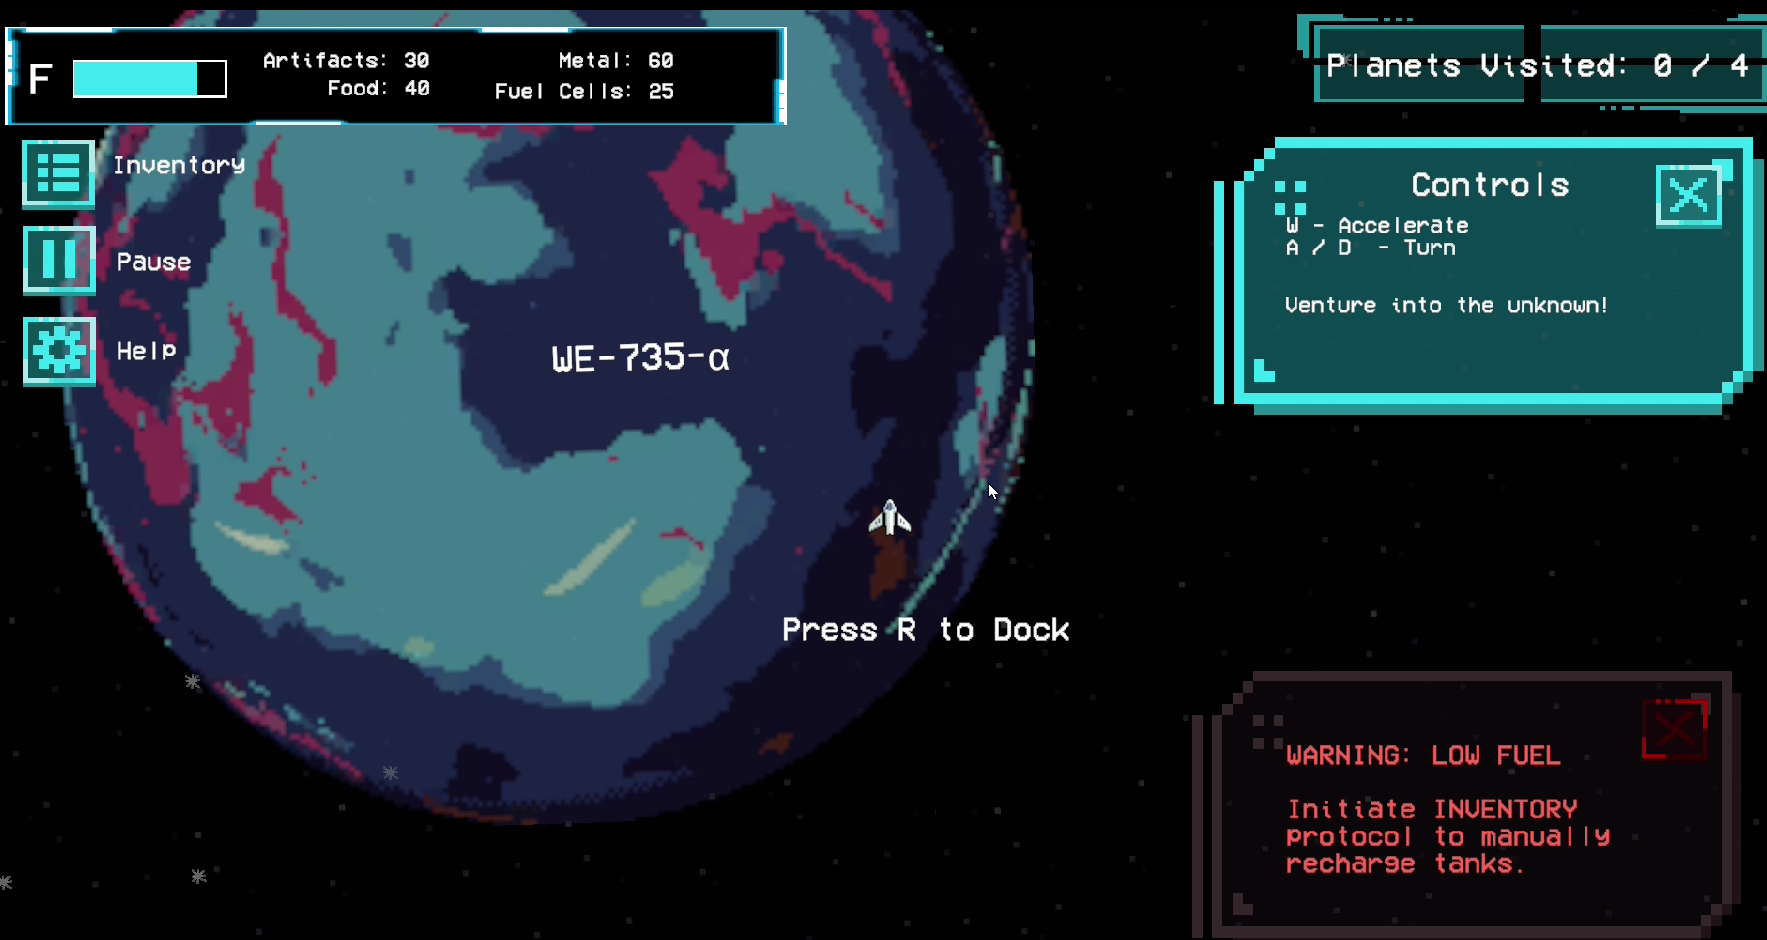 screenshot of the game which is a view of a planet from space with the option to dock at the planet